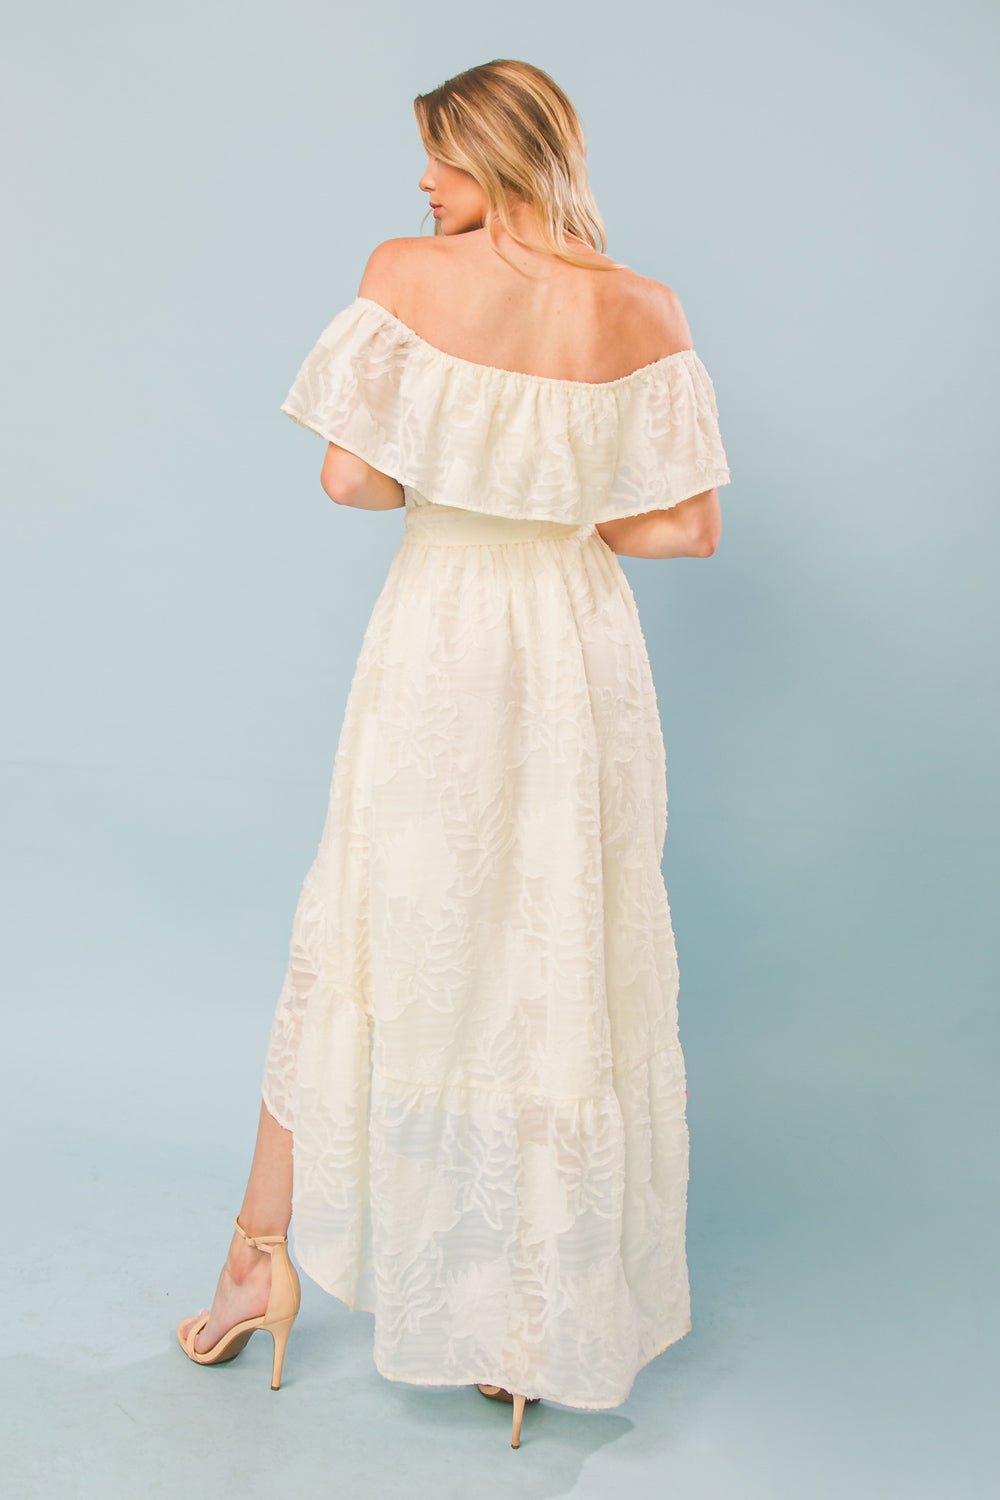 ONLY OTHER MEMORY WOVEN HI-LO MAXI DRESS